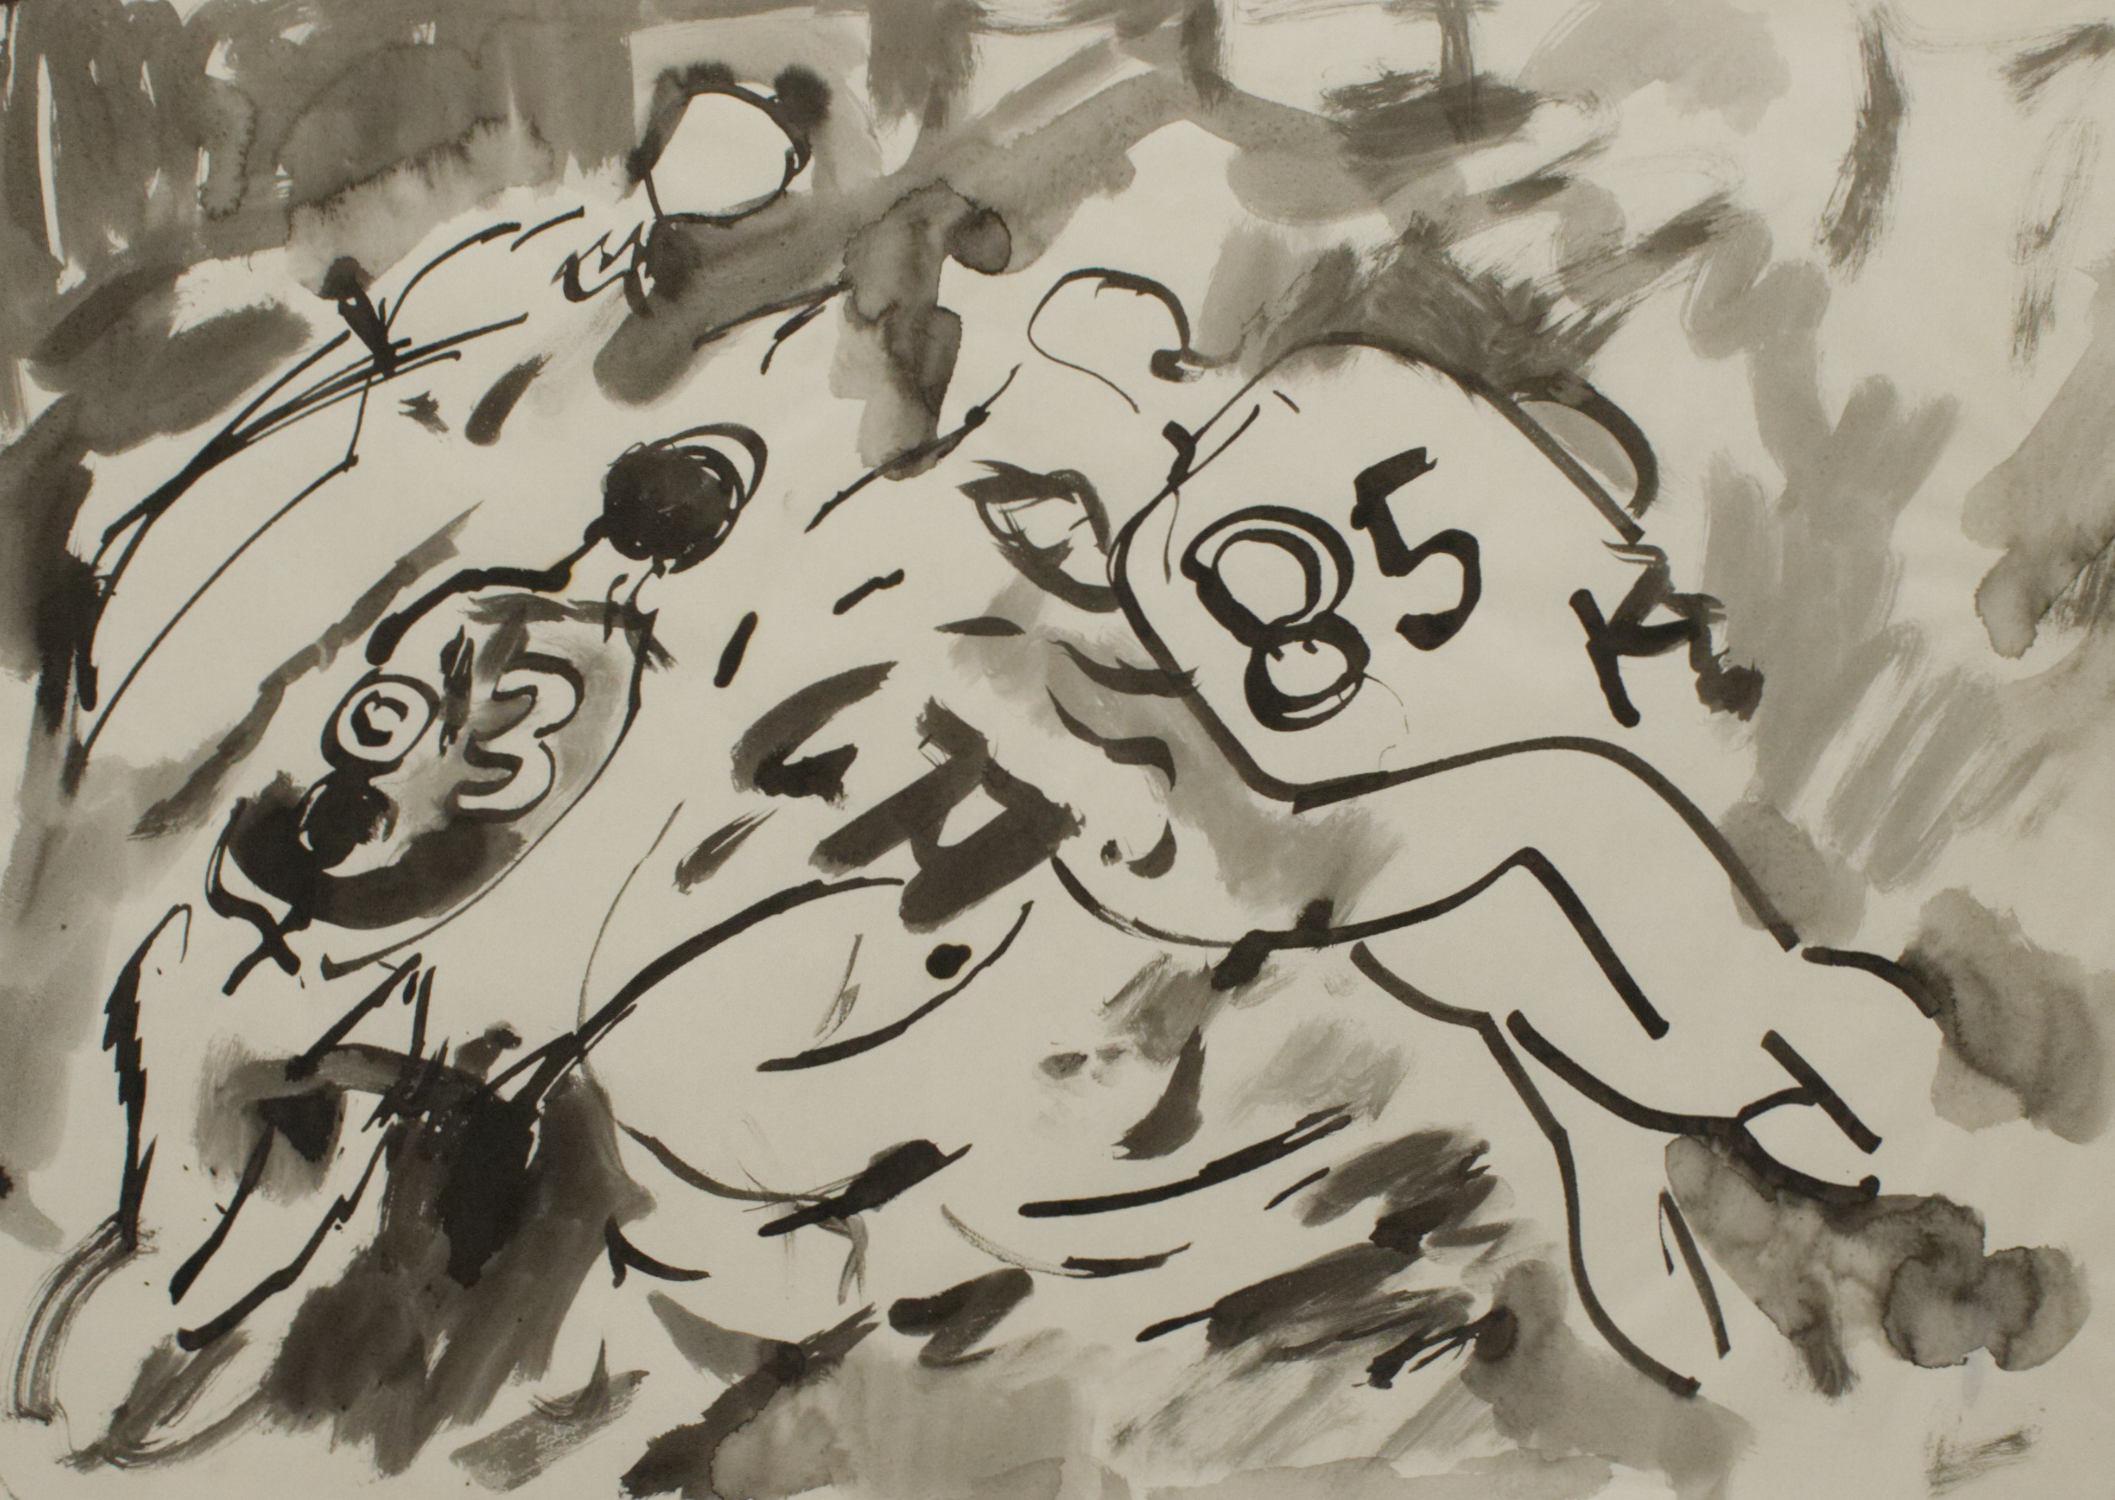 A ca. 1954 watercolor of a football scrimmage at Notre Dame, by artist Francis Chapin.  This was a study for a painting he created for the University in 1954.  The original painting still exists today inside the President's Suite on the Notre Dame